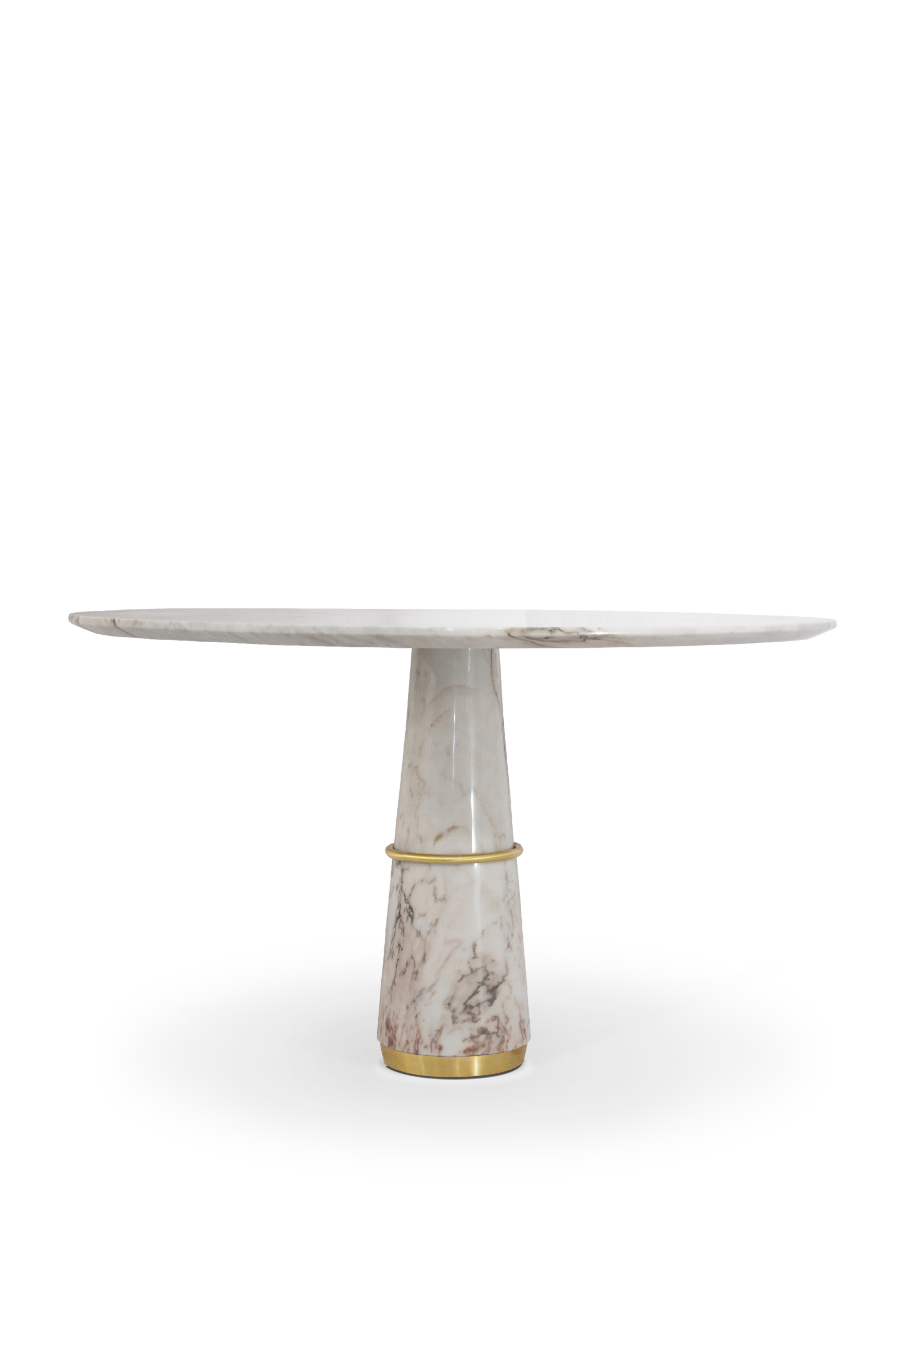 Elevate Your Dining Experience: Inspiring Dining Room Design
Agra Dining Table by BRABBU